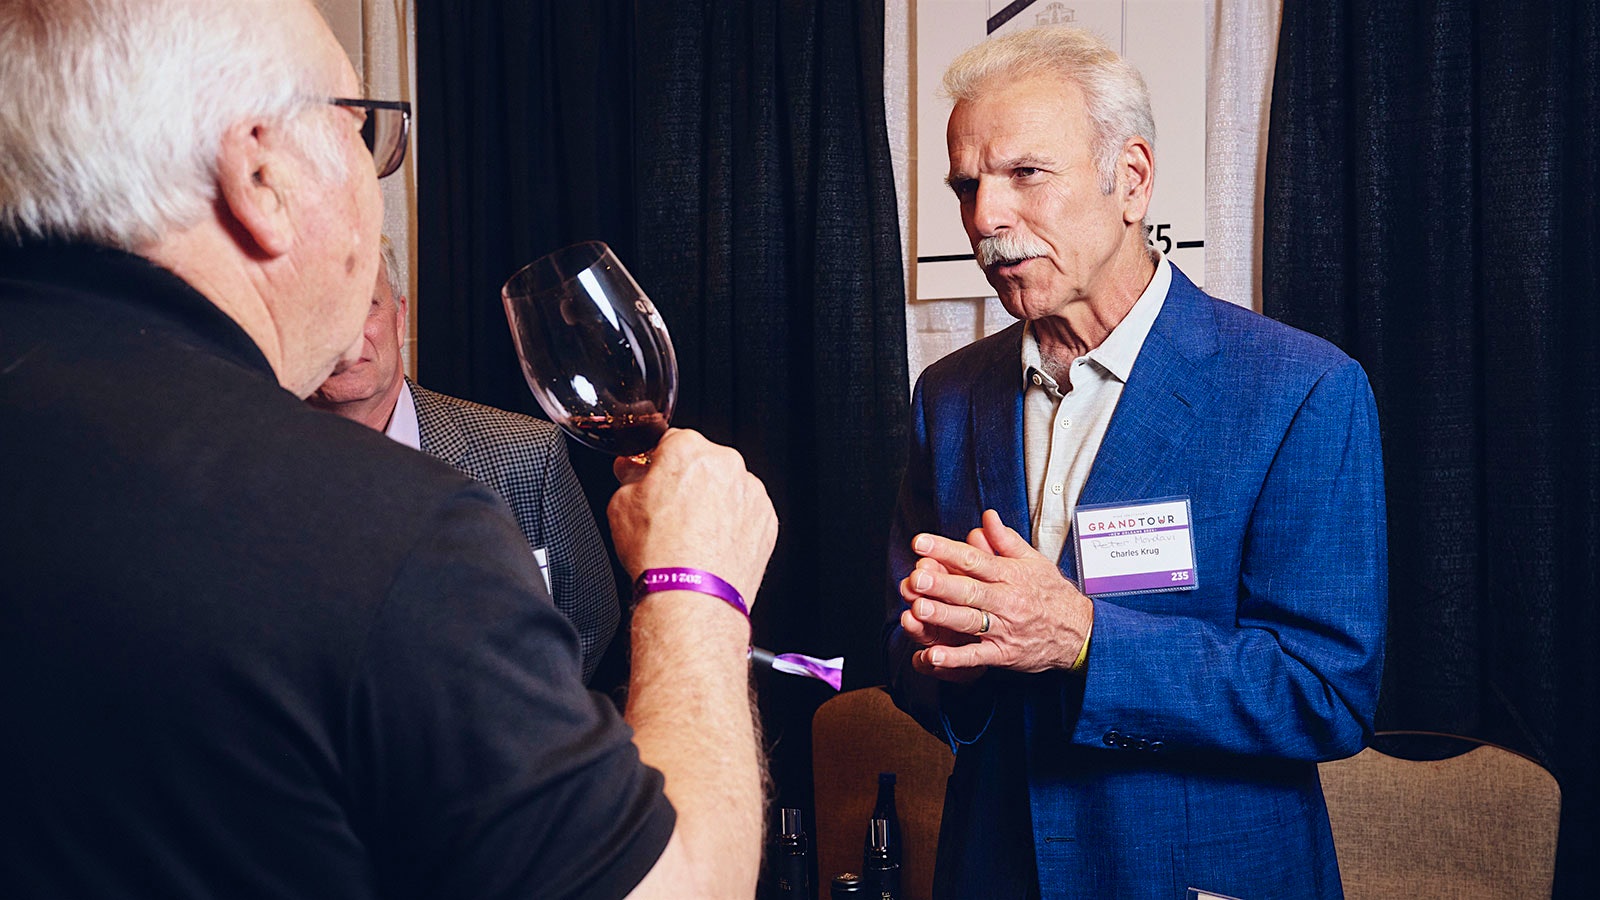  Winemaker Peter Mondavi Jr. of Charles Krug chats with a guest at the Wine Spectator Grand Tour in New Orleans.